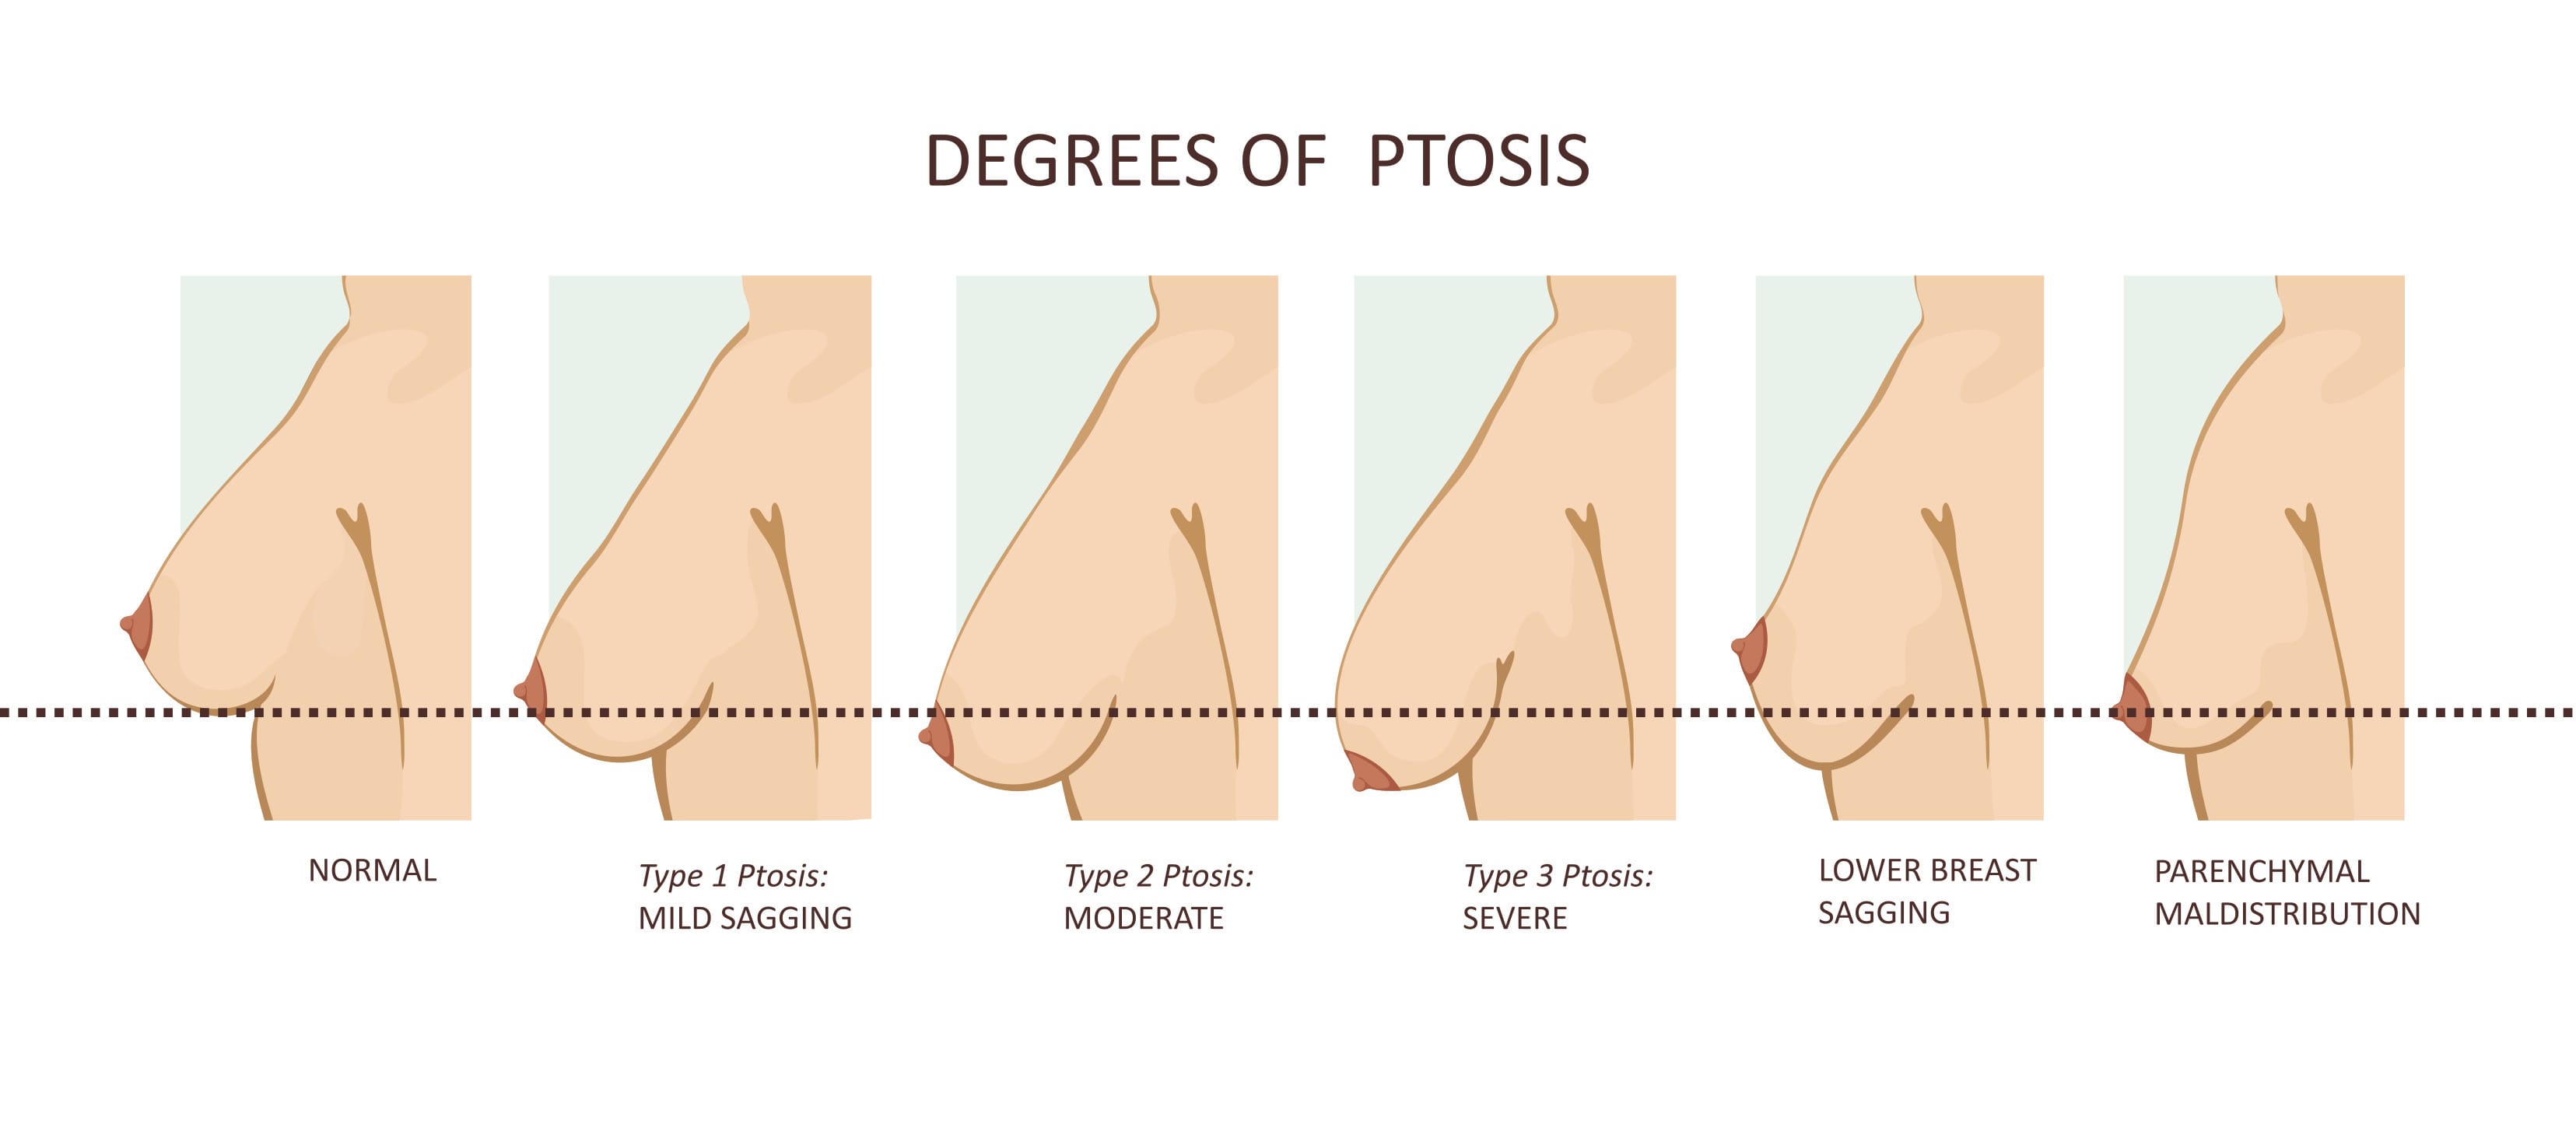 Infographic of the Degrees of Ptosis